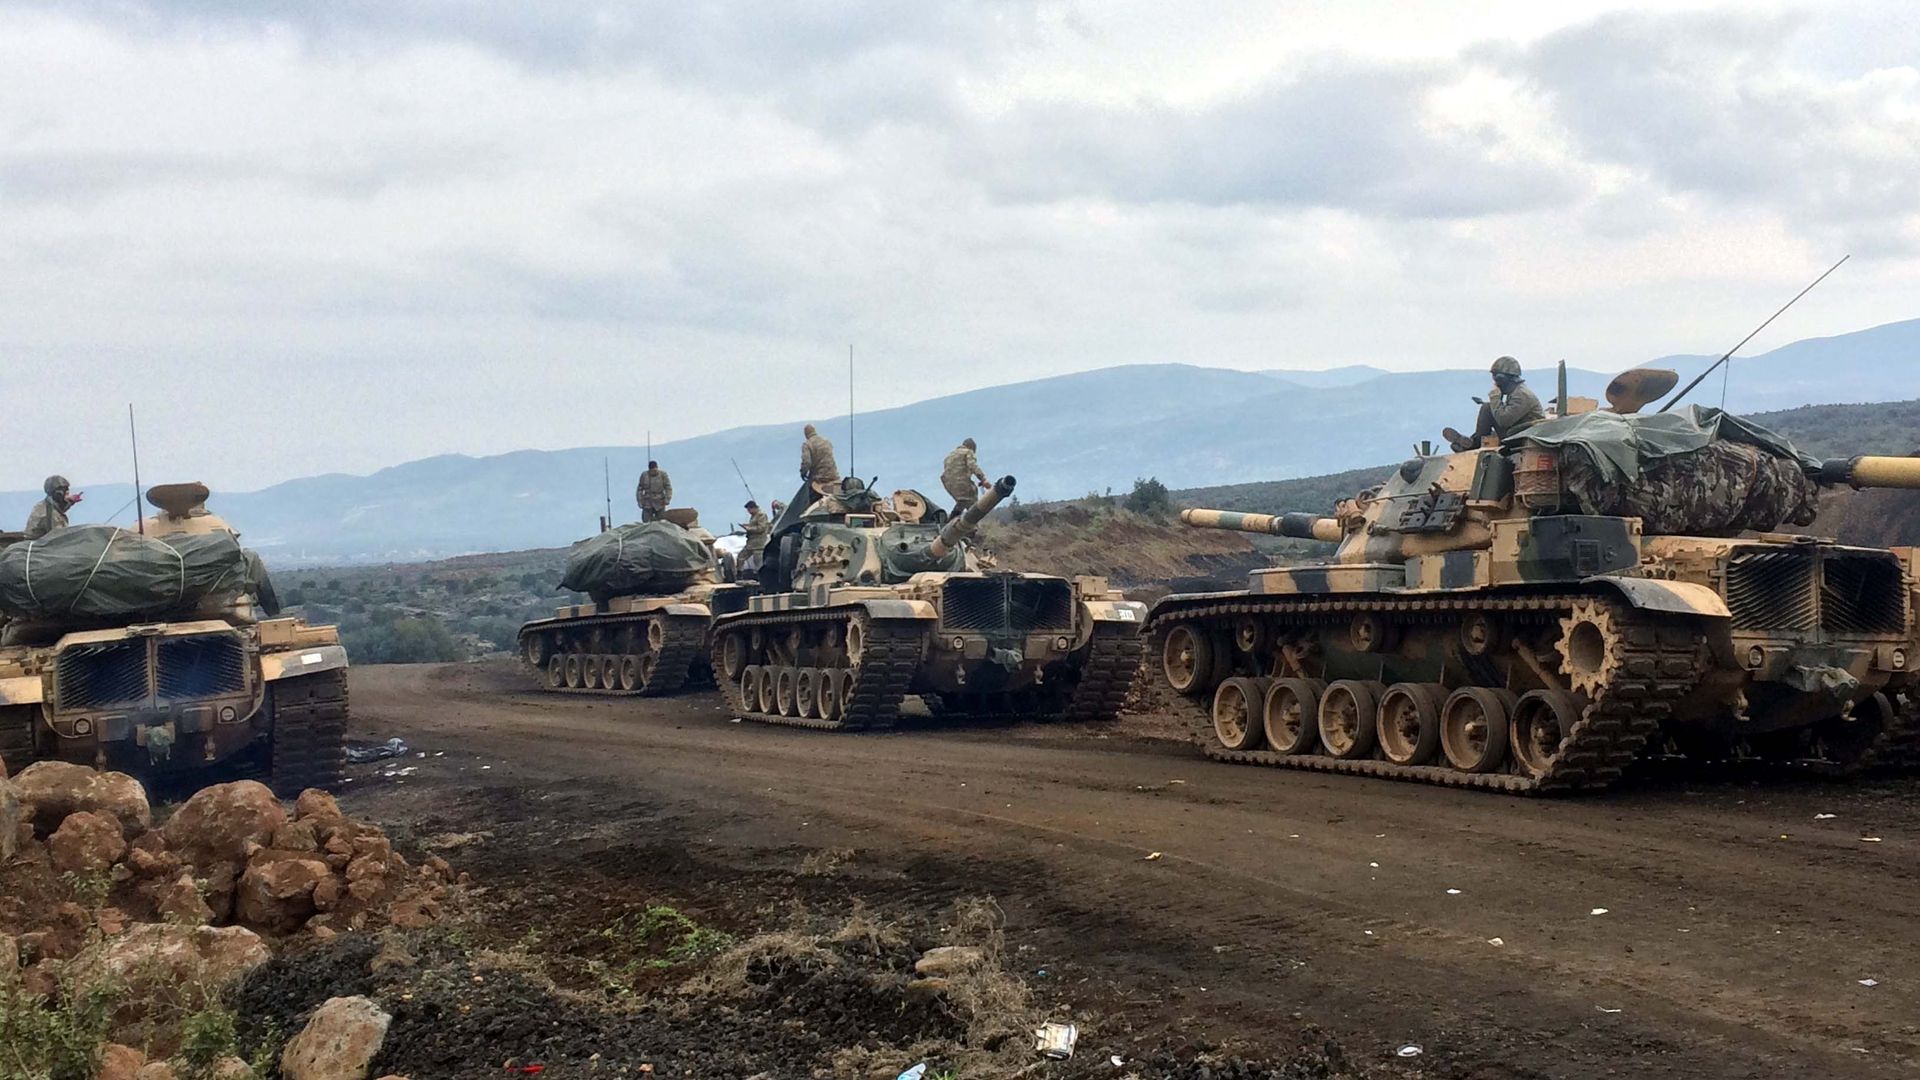 Turkish tanks march in northern Syria